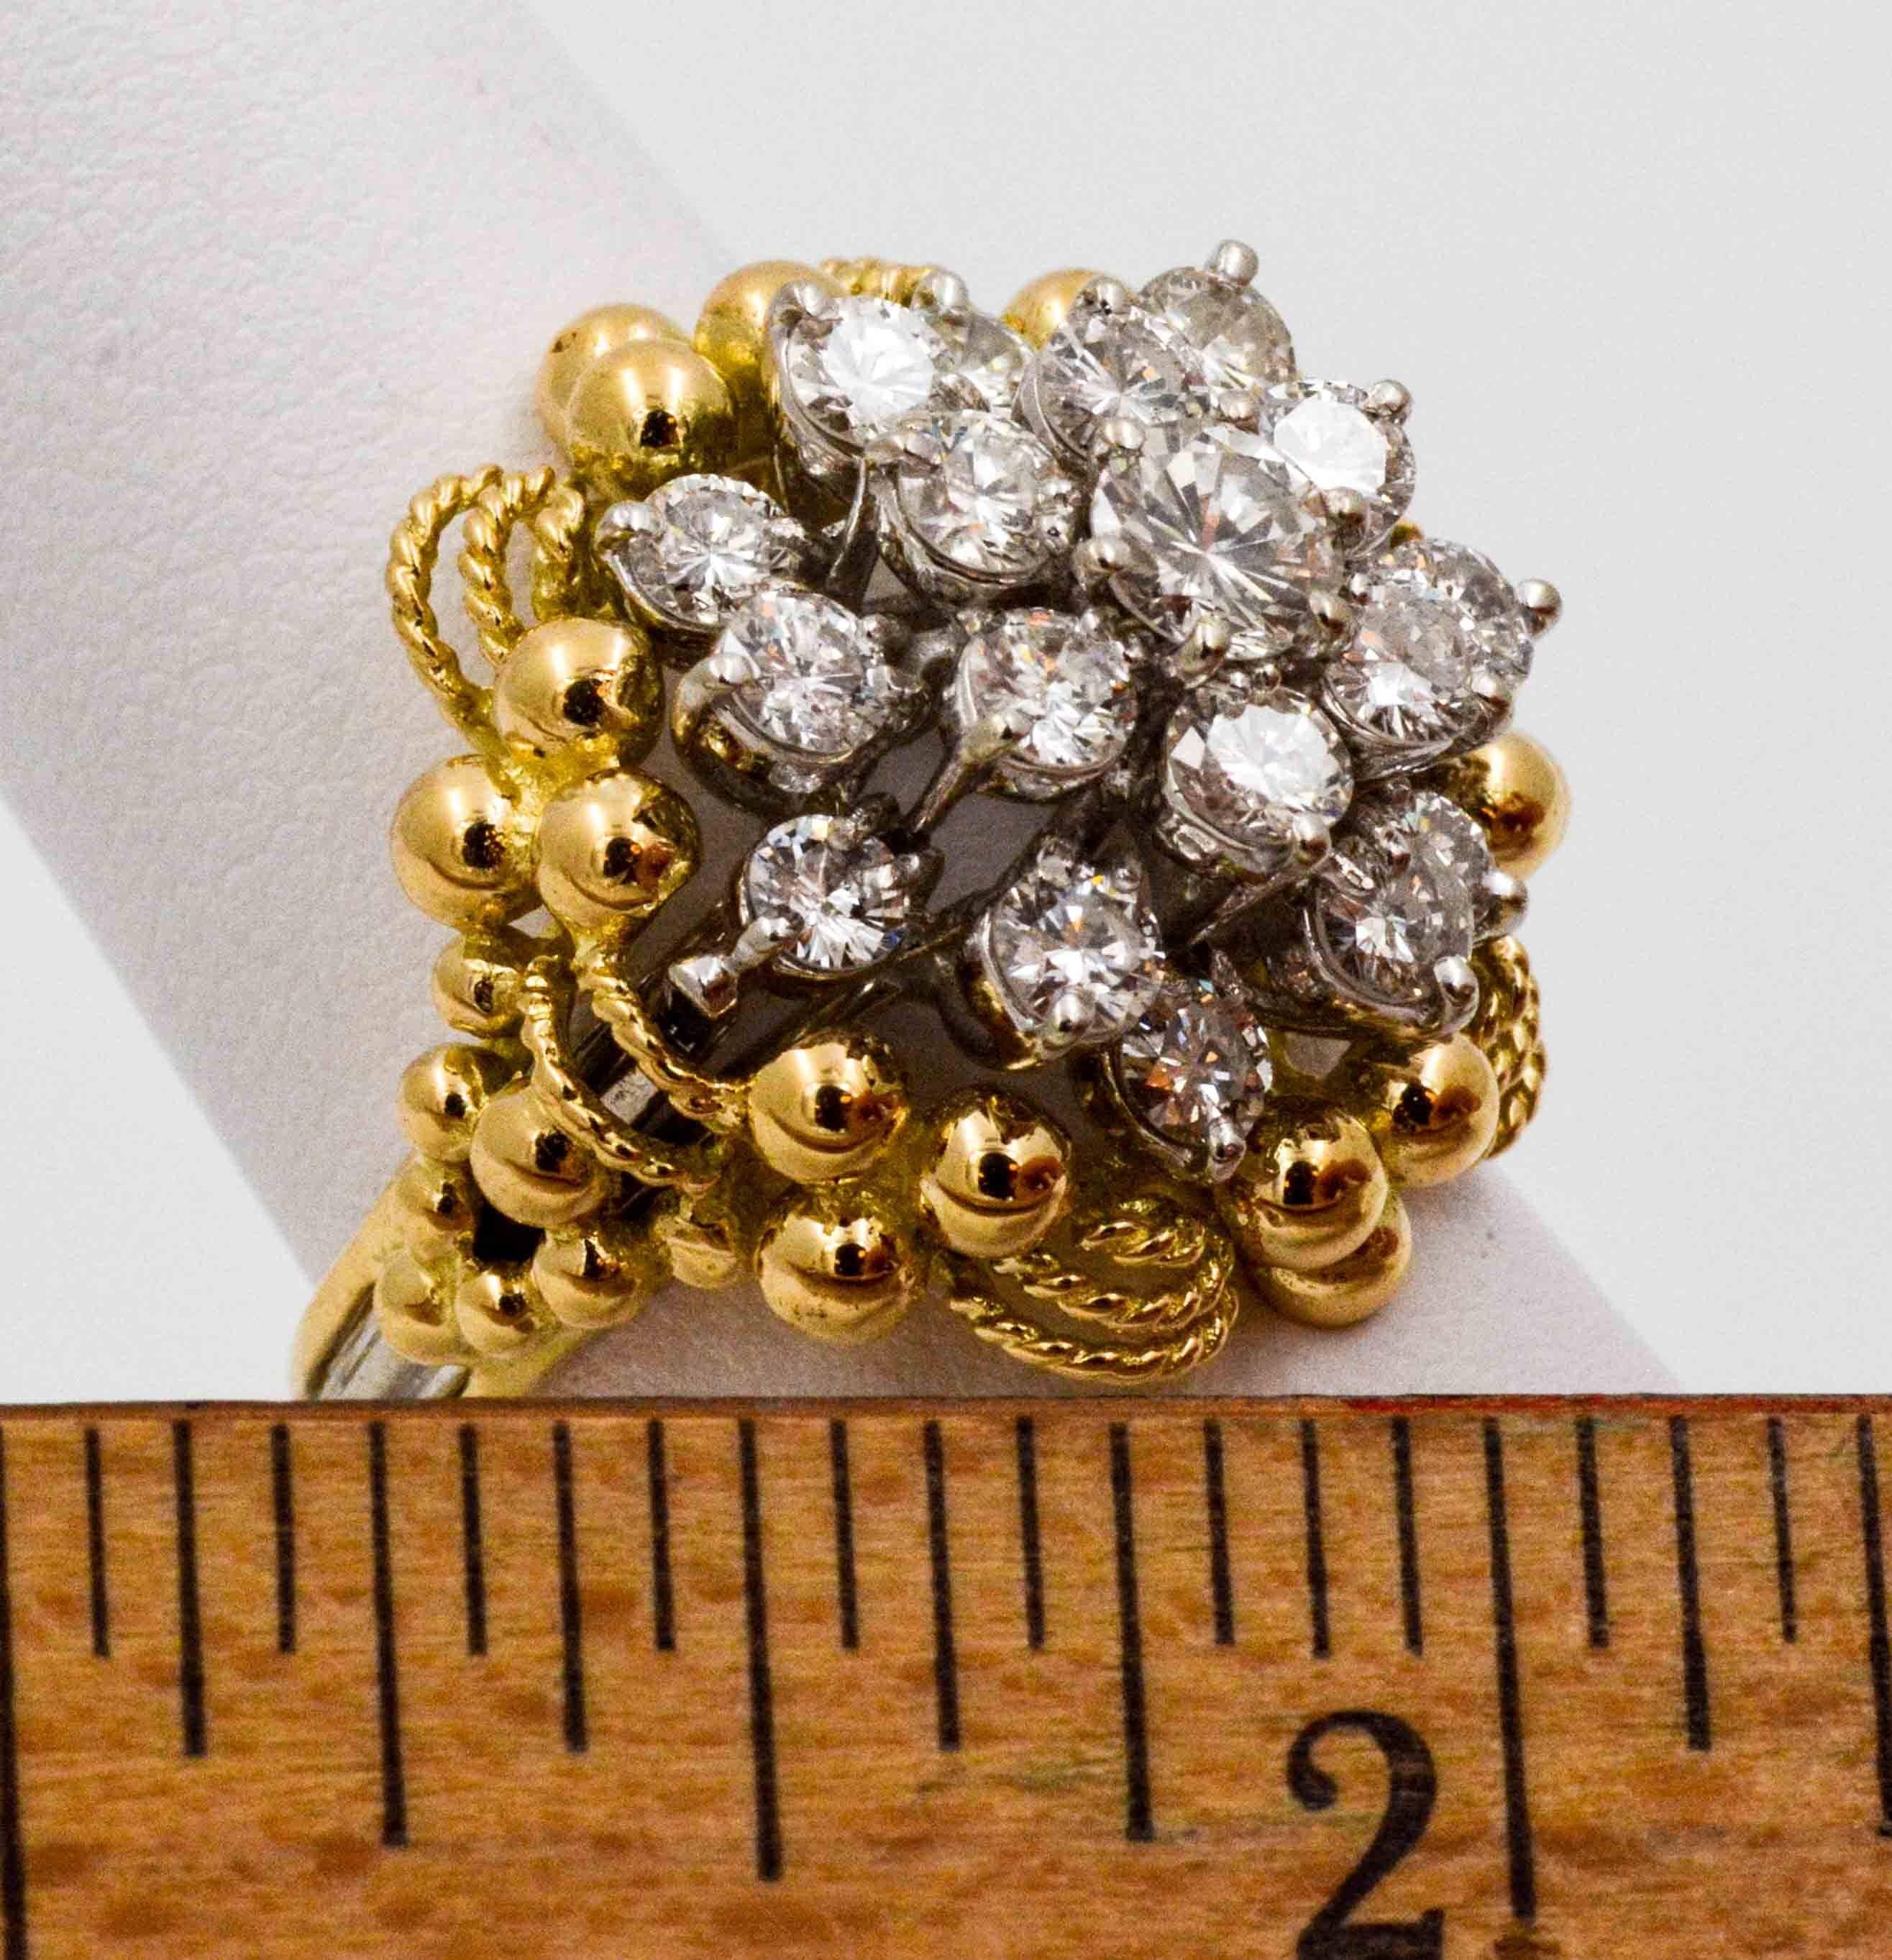 Nestled sweetly in this impressive cluster ring are 19 round brilliant cut diamonds ready for a night out! Crafted in both 14 karat white and yellow gold, this cluster ring is both dazzling and elegant. The diamonds weigh 2.0 Carats total weight (I